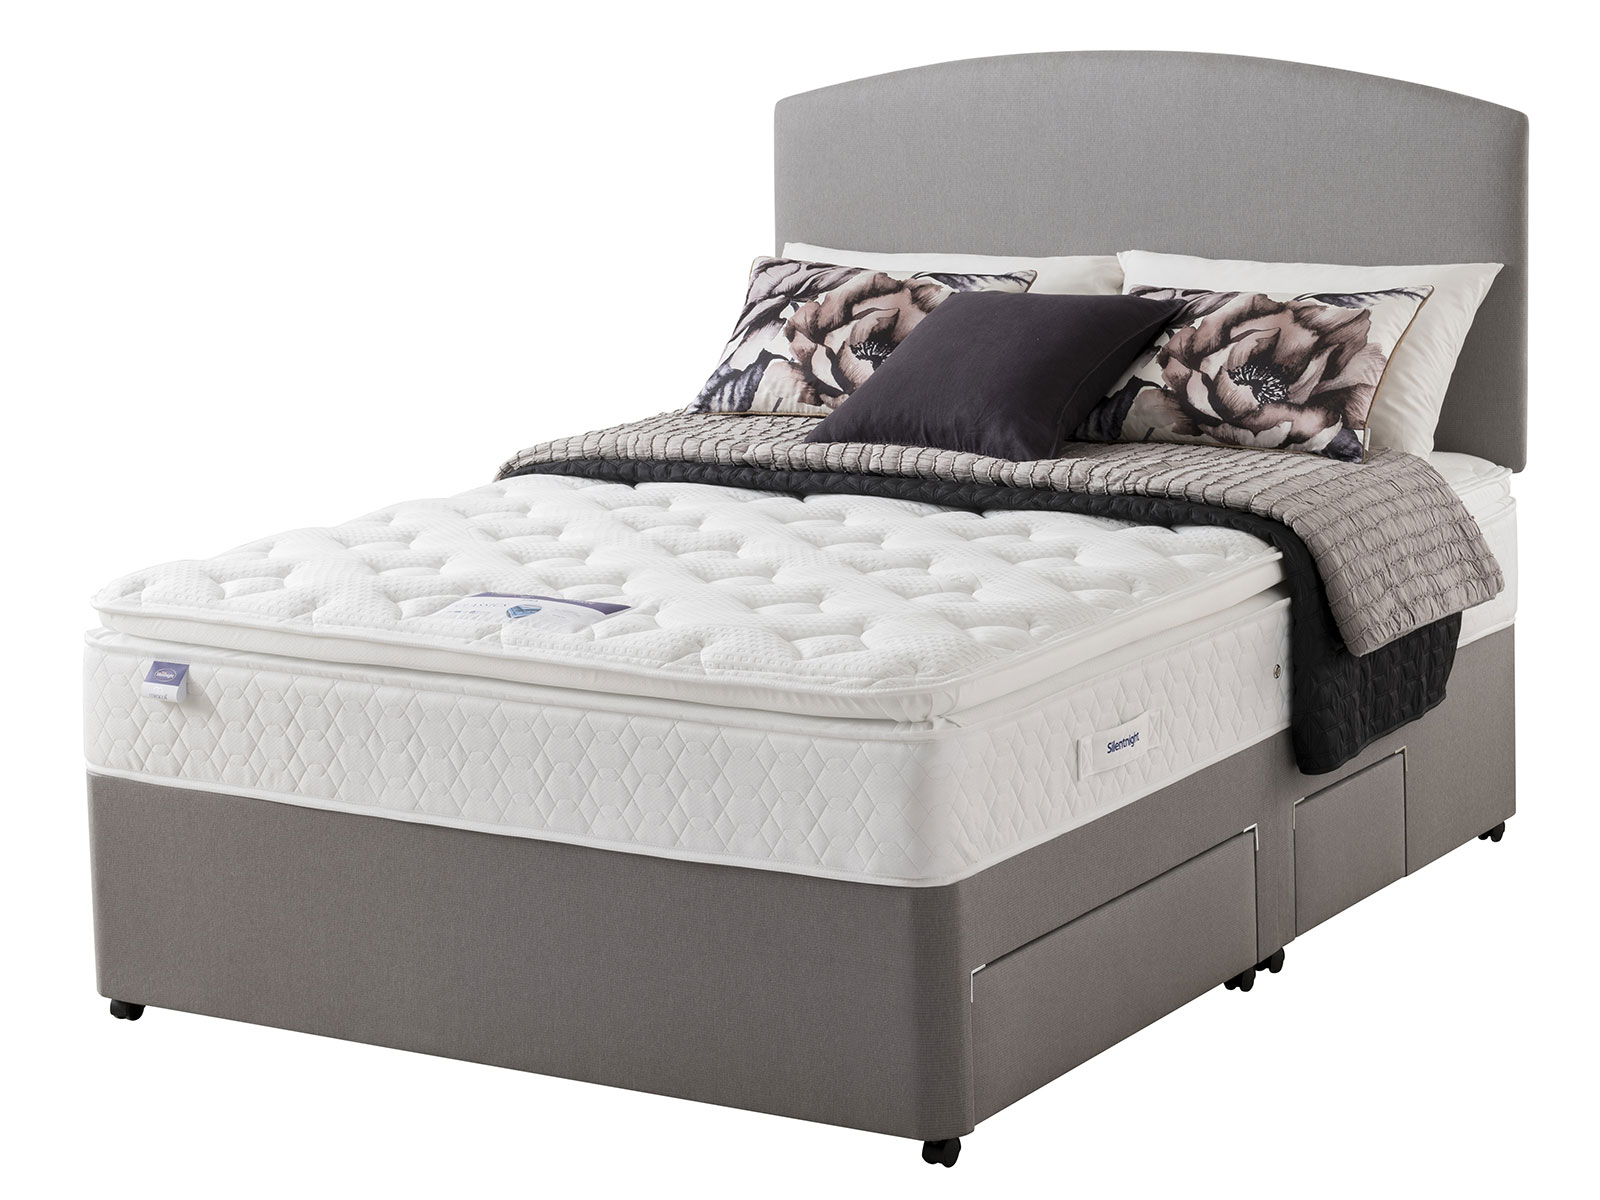 Beds 24/7 4ft6 Double Silentnight Atala Deluxe Eco